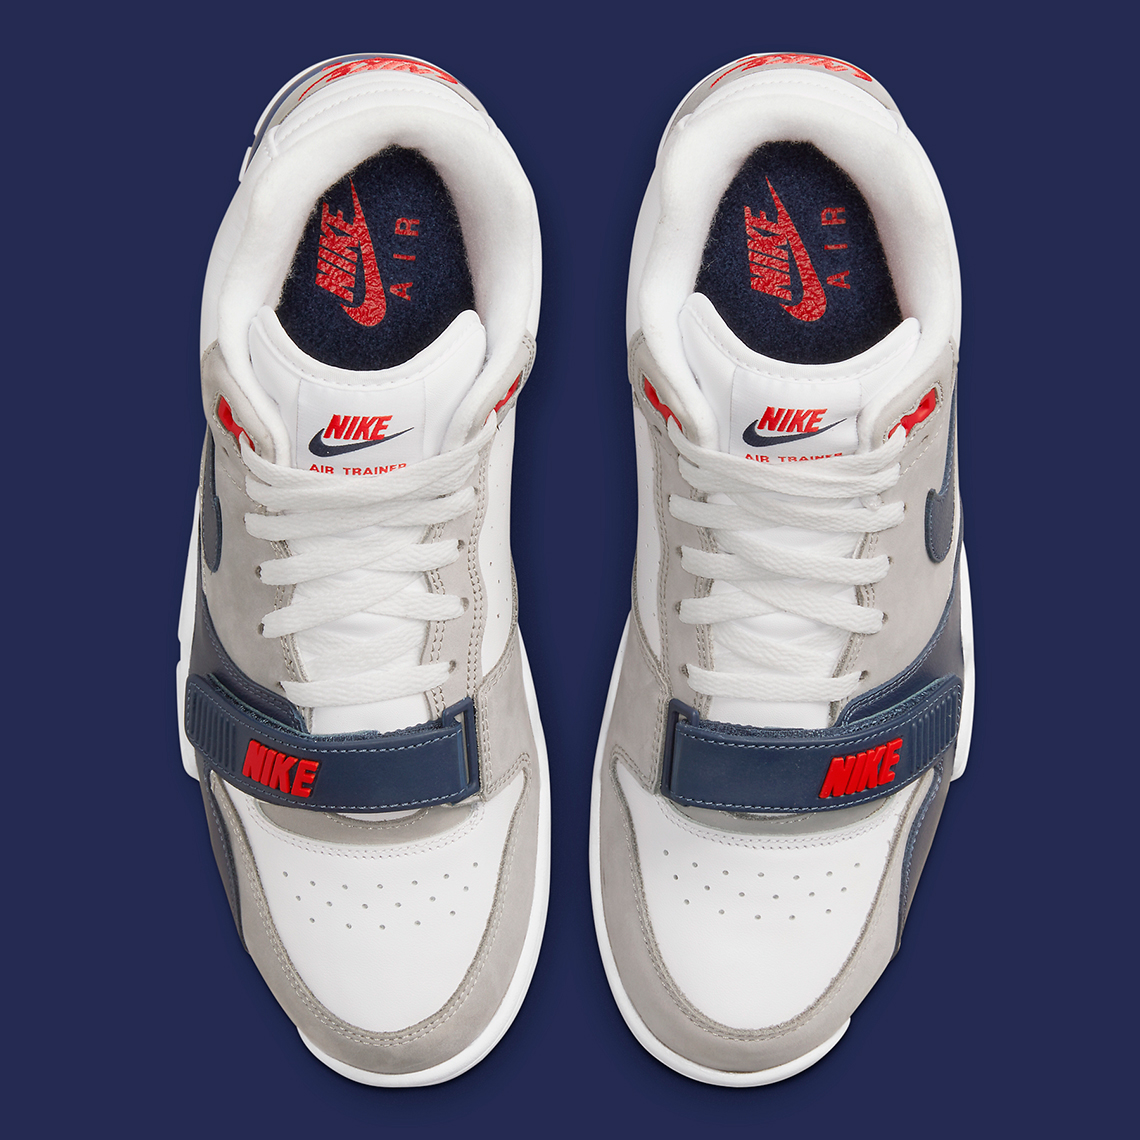 nike air max silver shoes online india price list White Grey Navy Red Dm0521 101 1